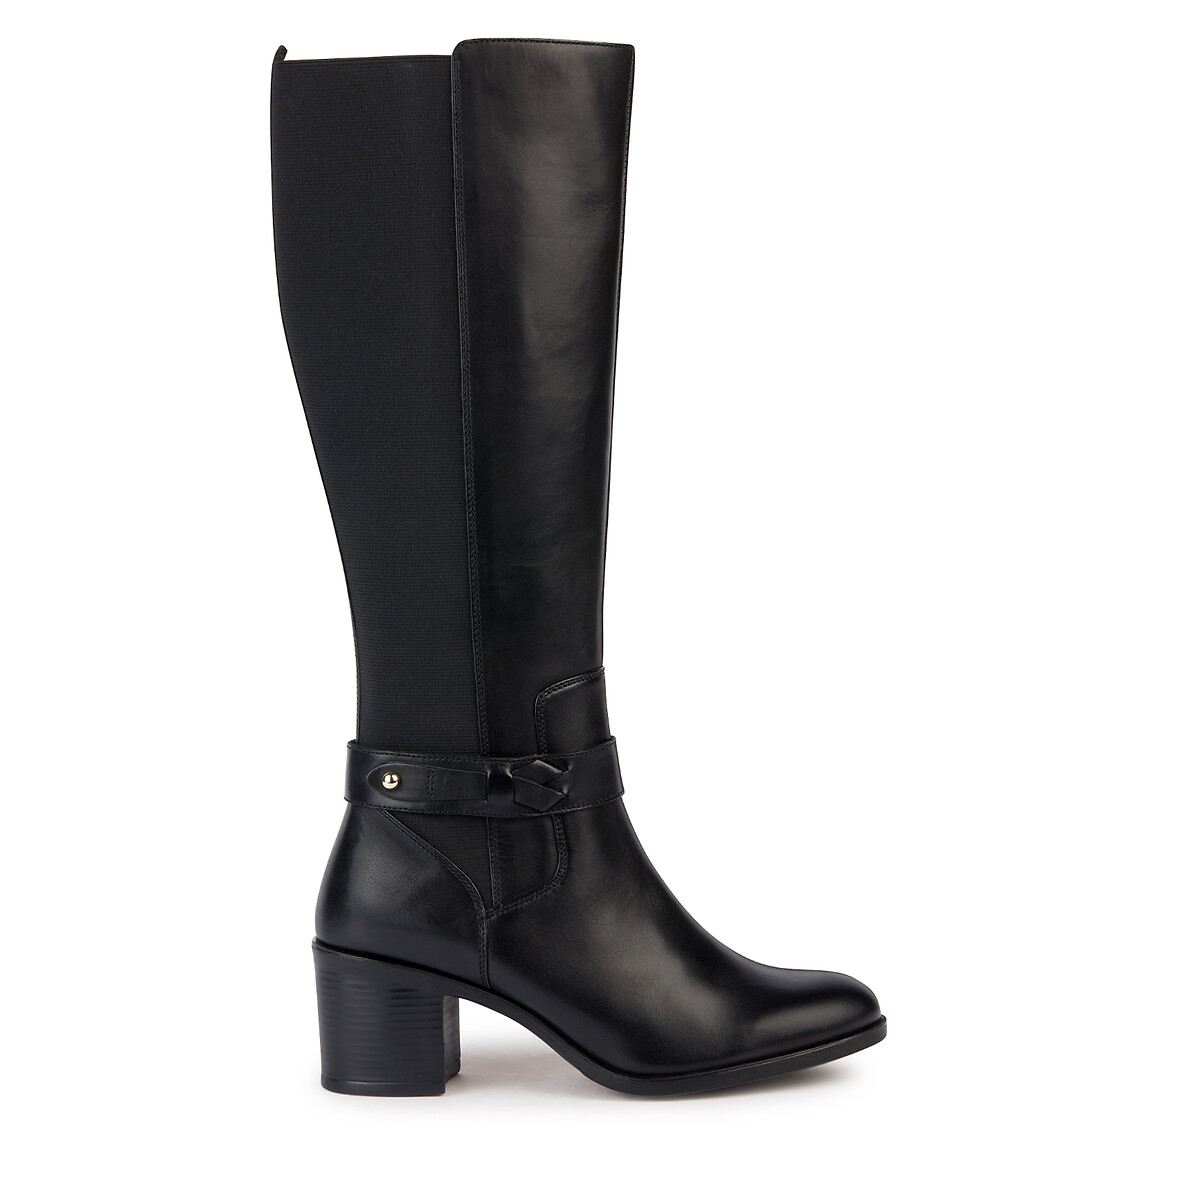 Image of New Asheel Knee-High Boots with Block Heel in Leather